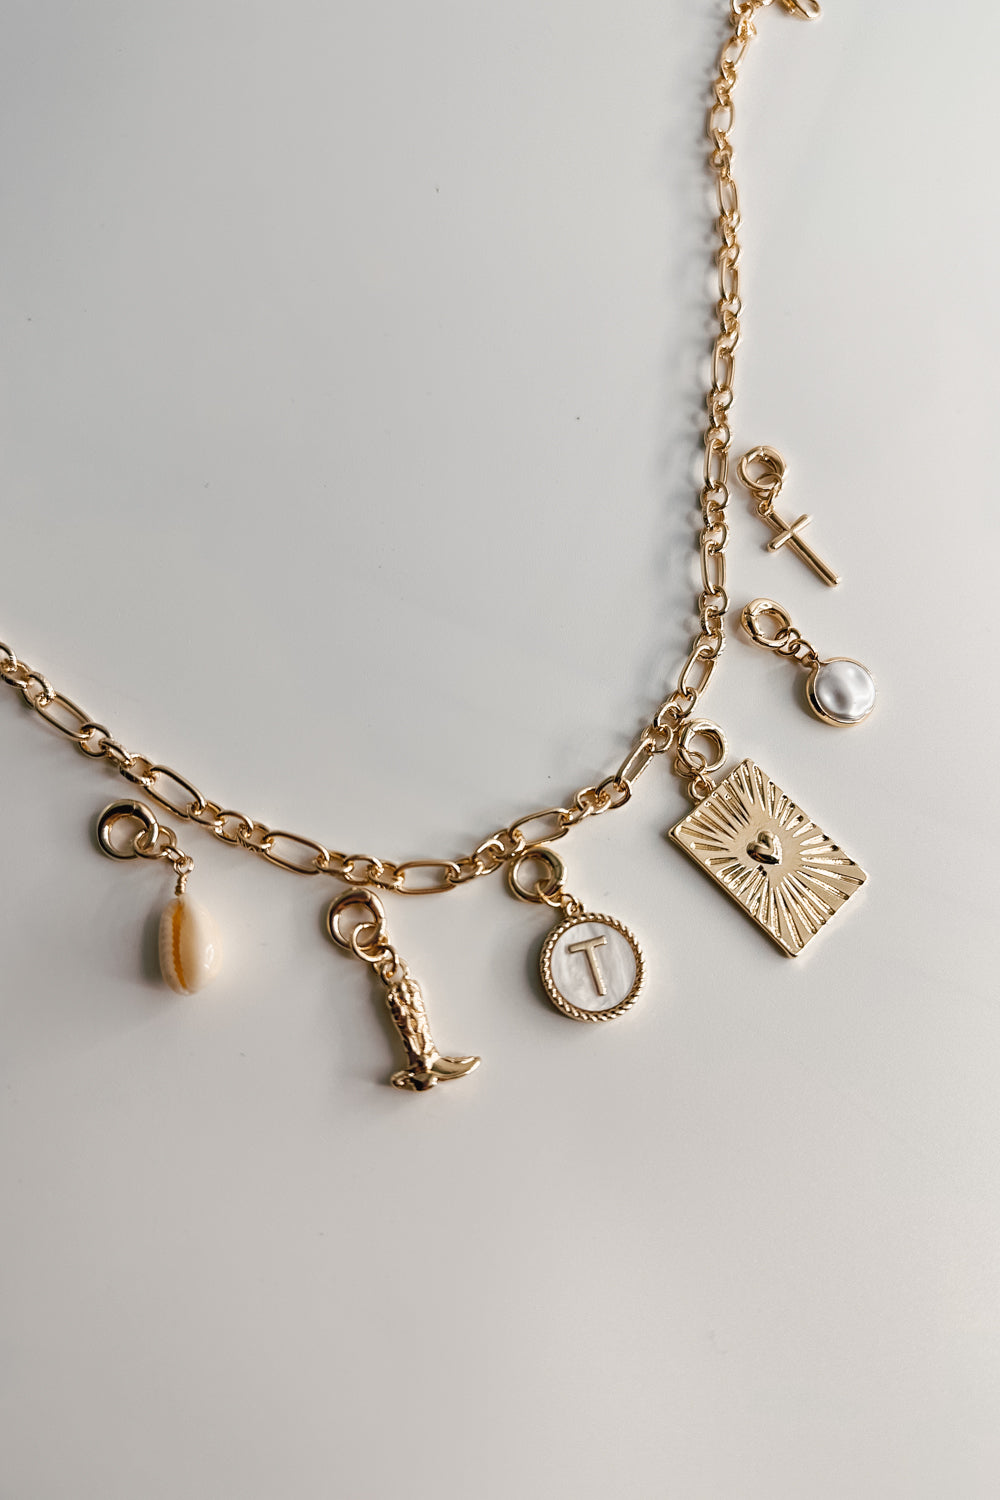 Image shows the bottom of the Kennedy Gold Chain Link Necklace against a white background. Necklace has gold circle and oval links. Shown with 6 assorted charms added.